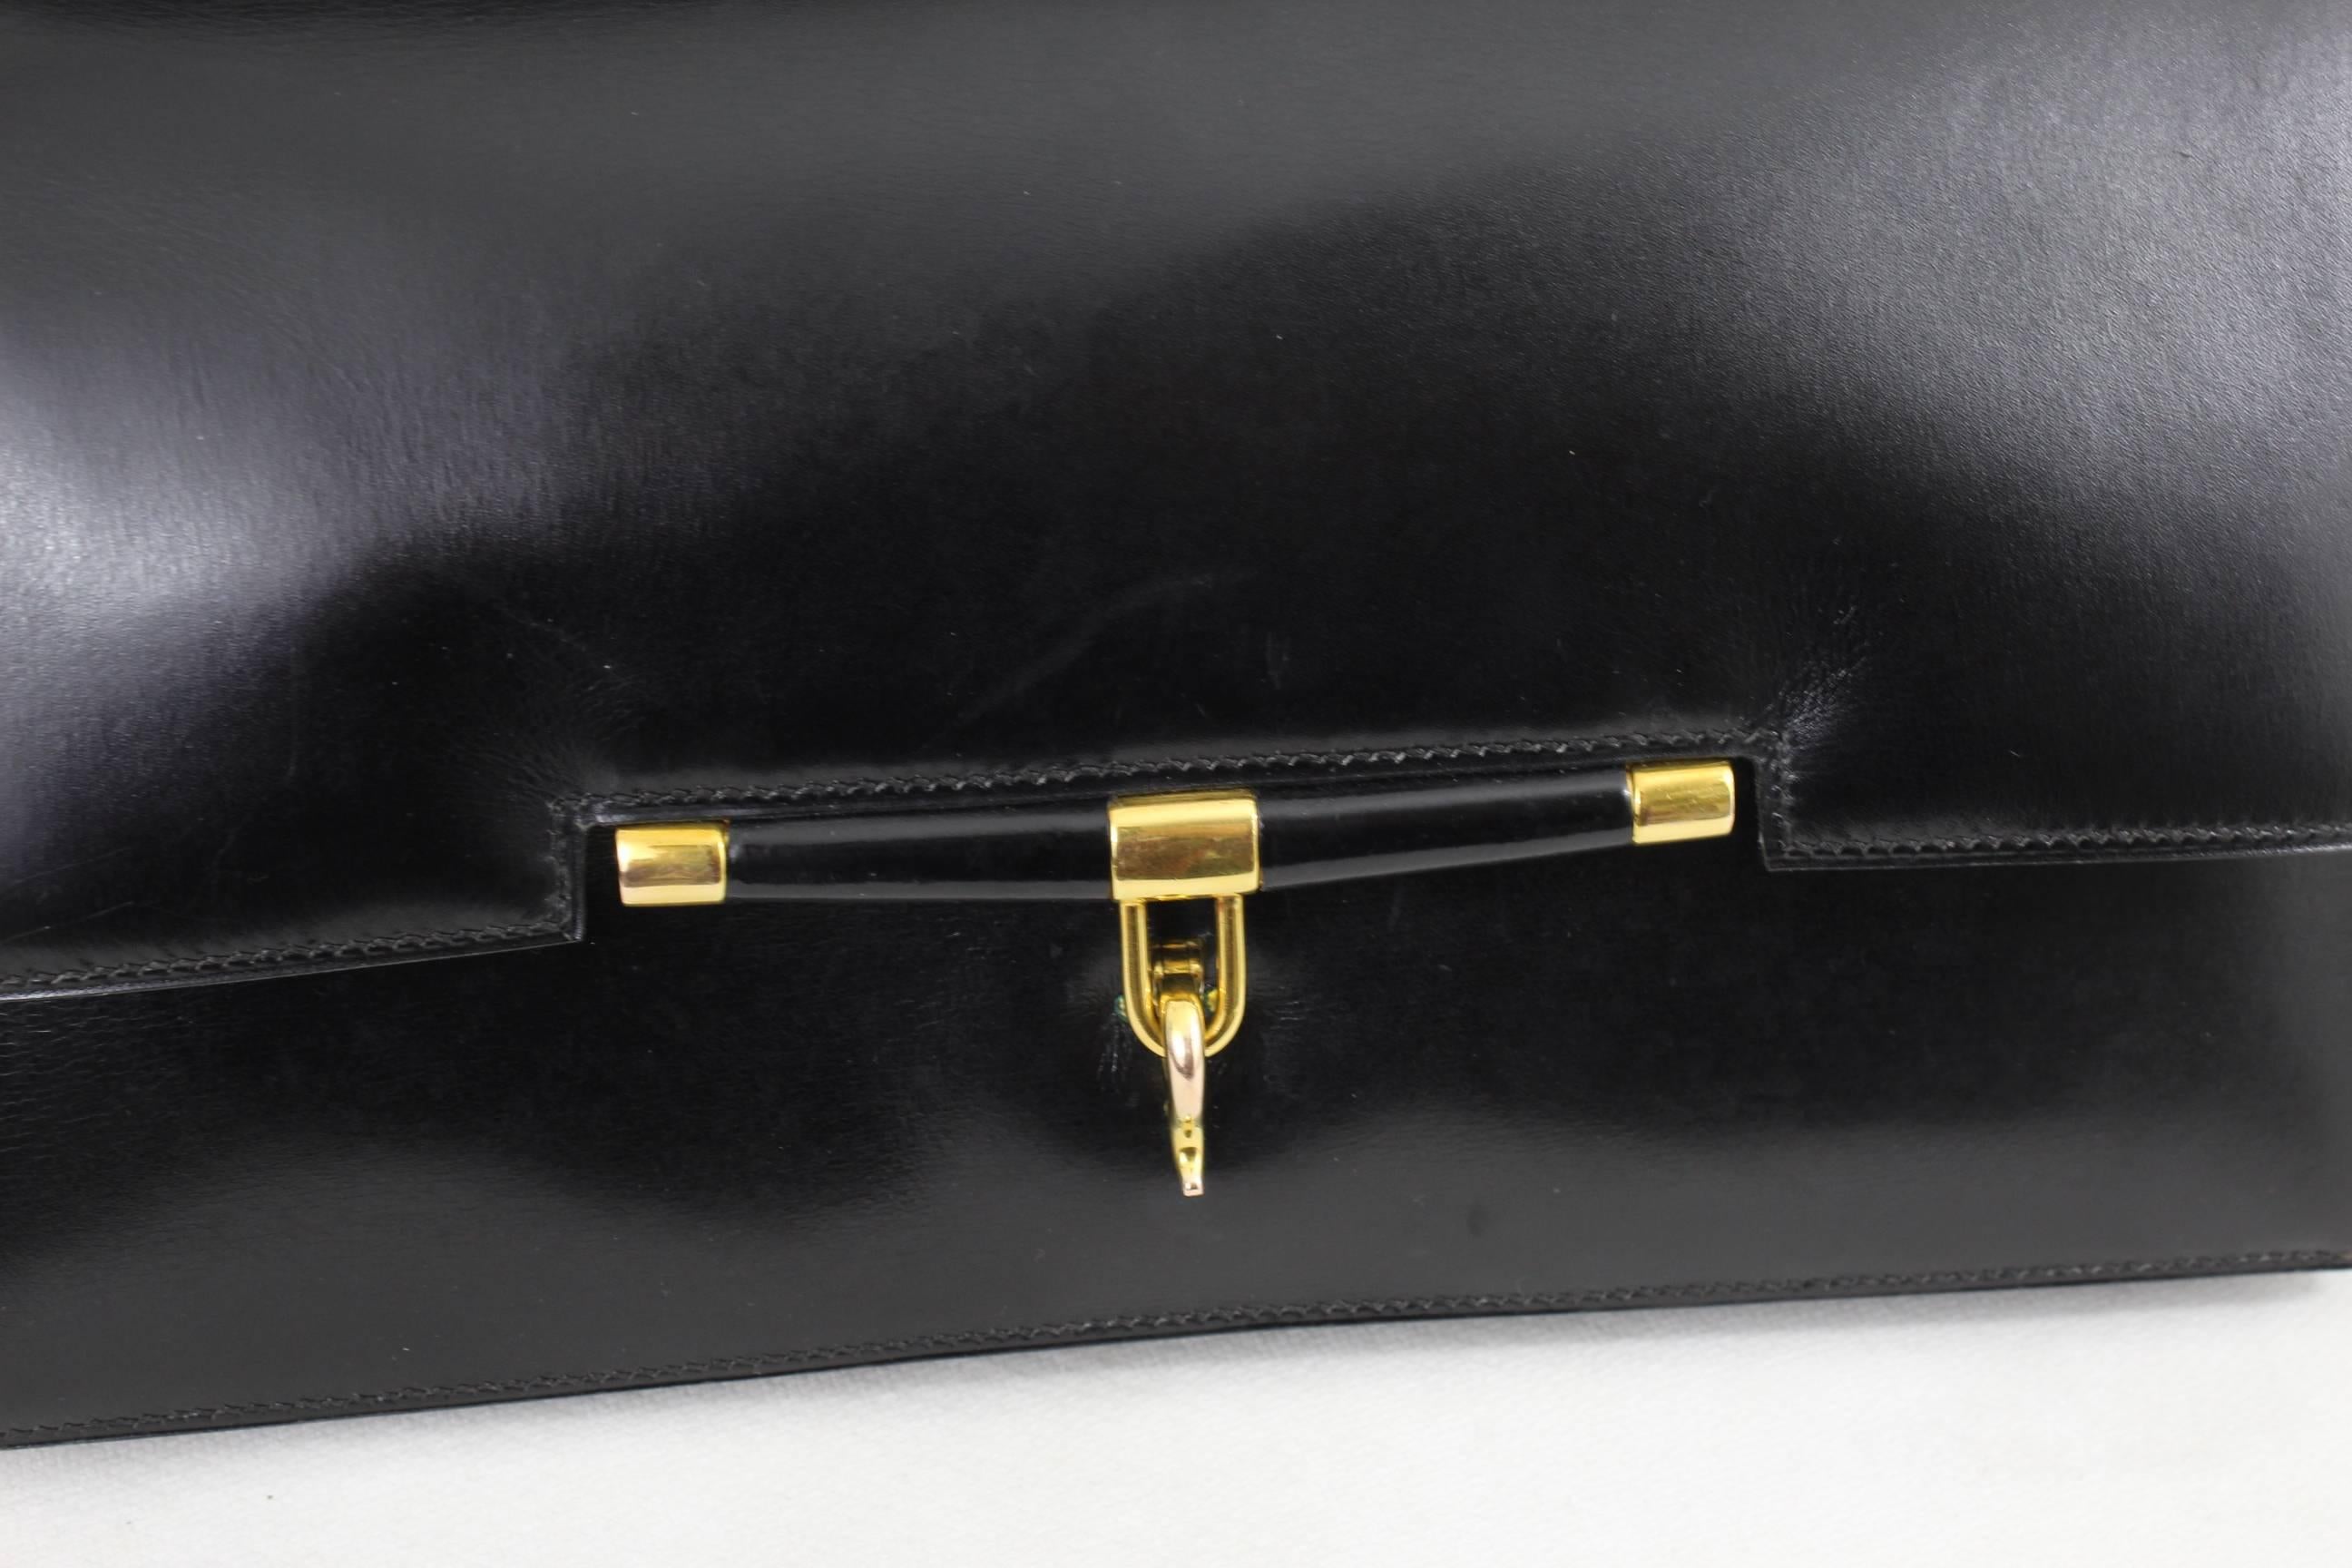 For sale an amazing Vintage Hermes Palonnier Bag in Black Box Leather and Golden Hardwarre. 

bag from late 60's early 70's but in excellent condition, it has almost no use.

Clasp signed 

handle in excellent condition

Size 10.6*6.5